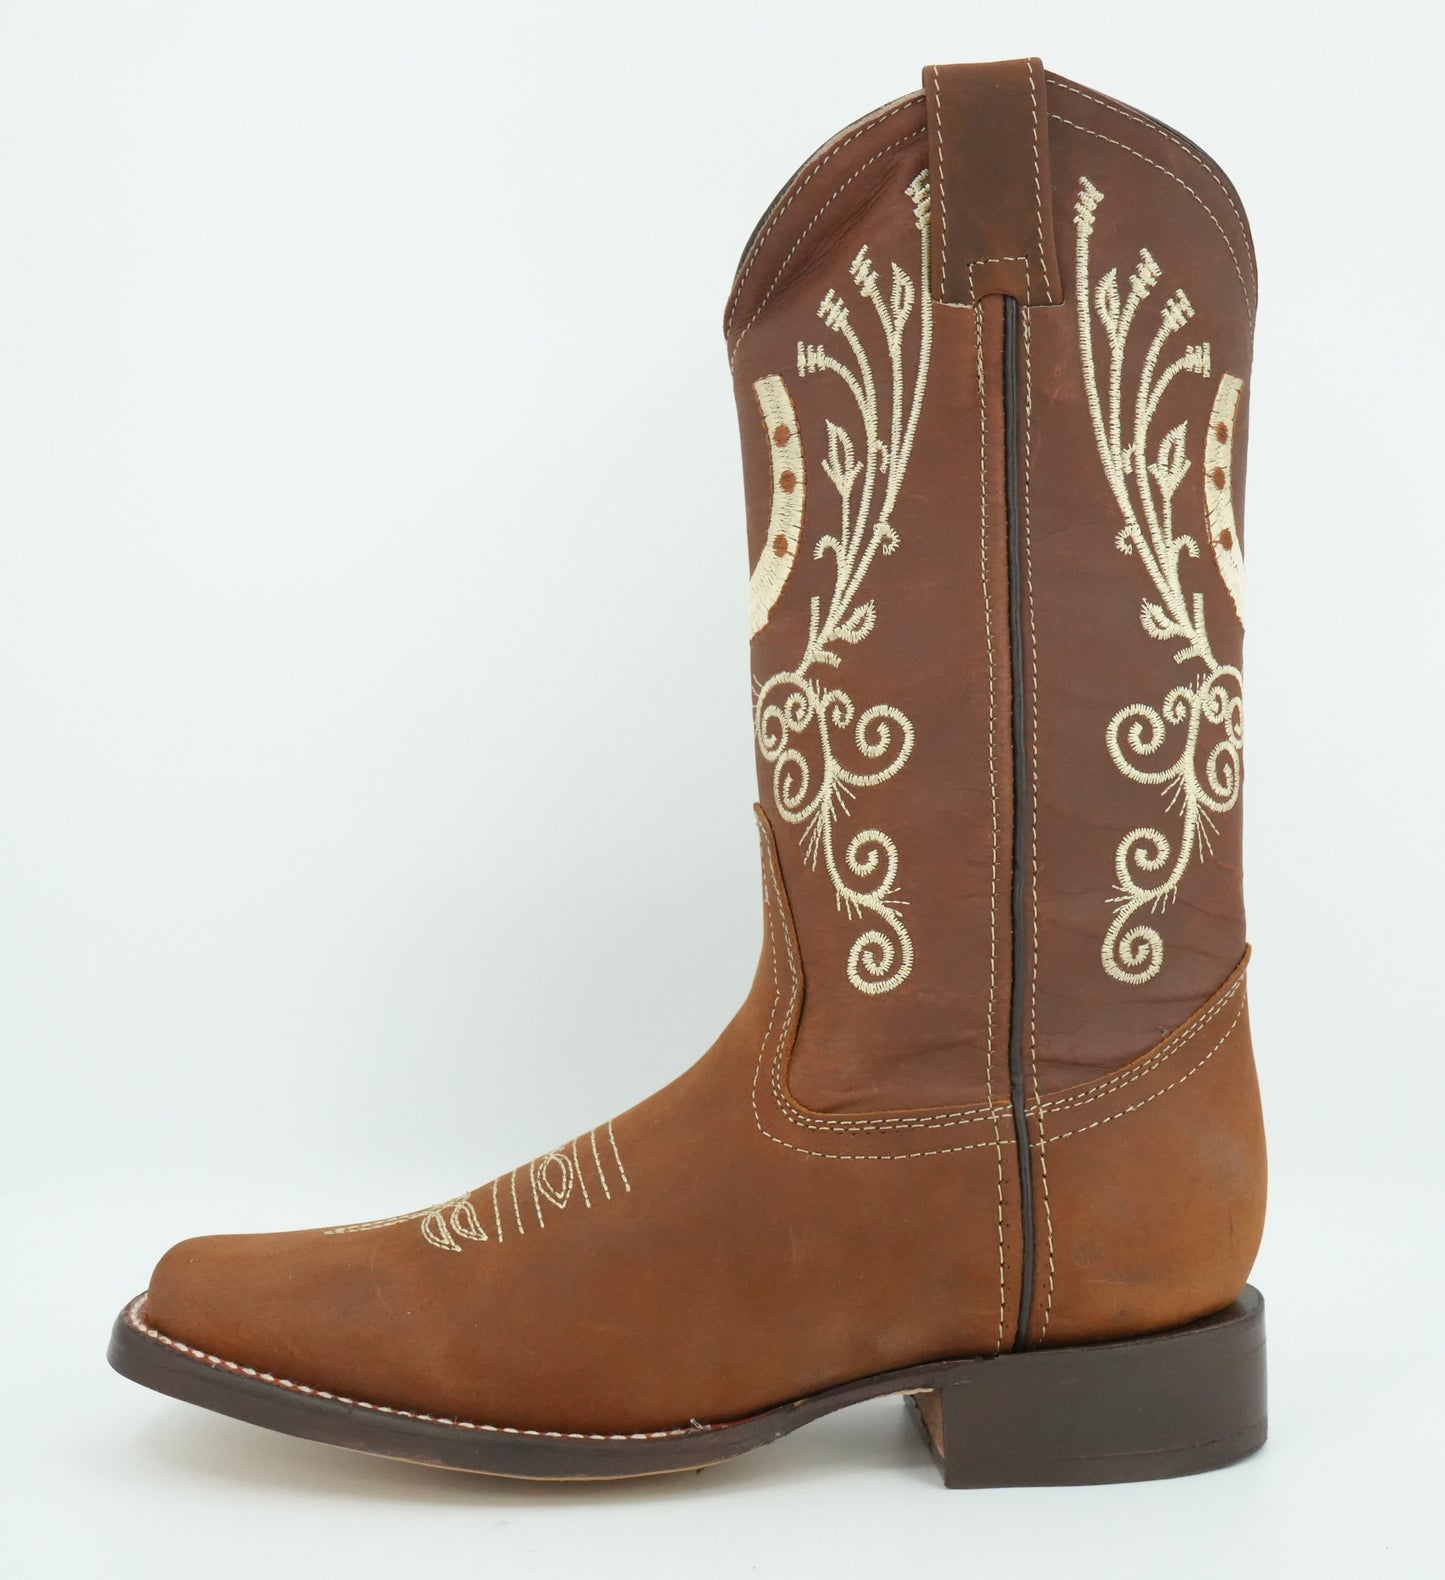 La Sierra Women's Tang Embroidered Horseshoes Square Toe Boot